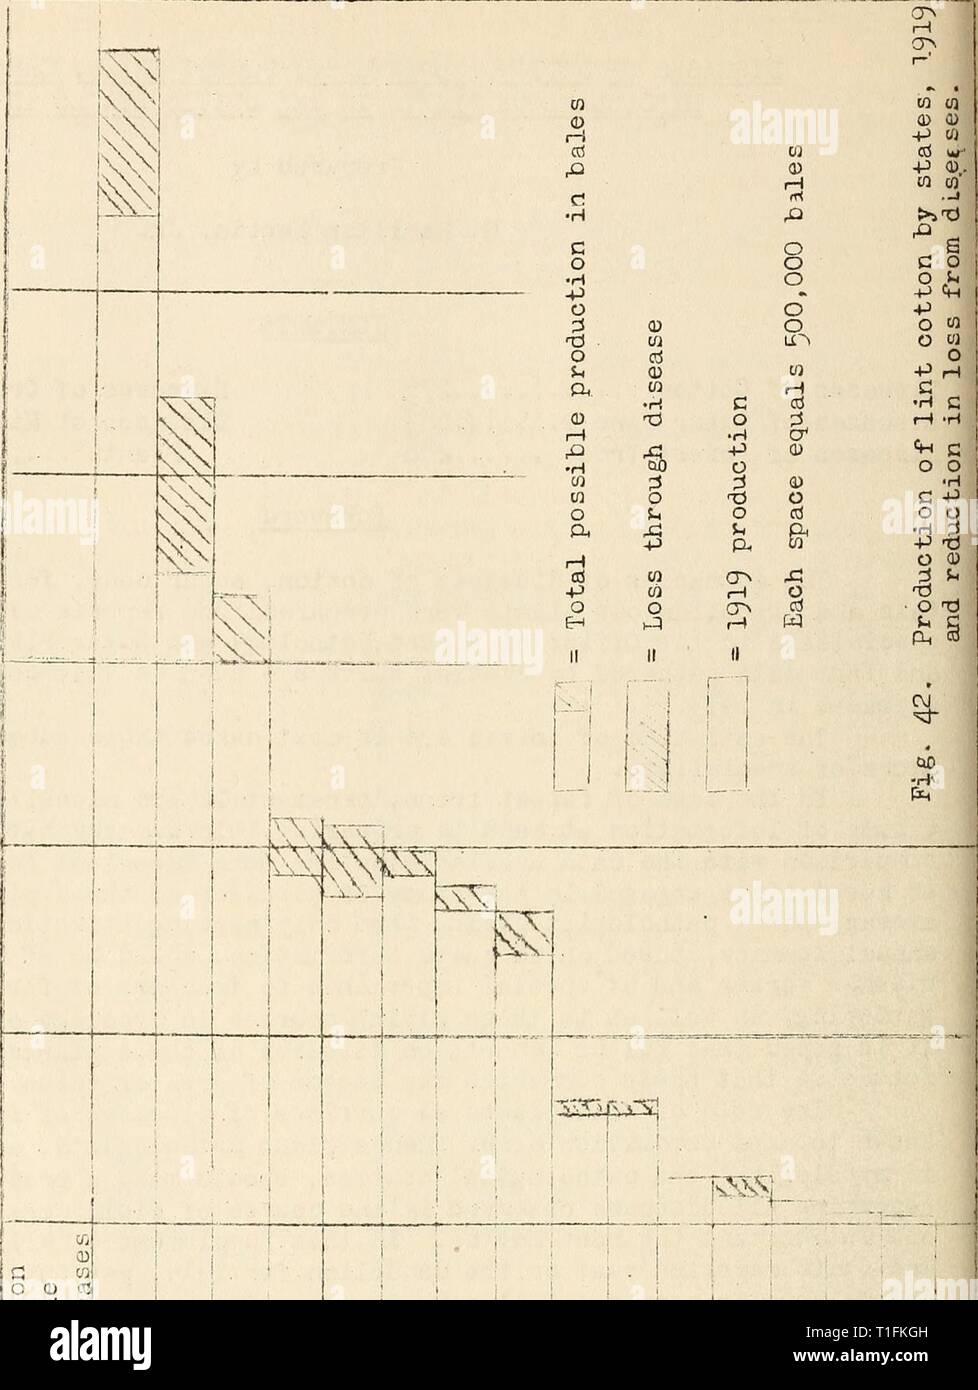 Diseases of cotton, sugar cane, Diseases of cotton, sugar cane, forest trees, ornamentals and miscellaneous plants in the United States in 1919  diseasesofcotton11mart Year: 1920  275 '1? 1 1 E tât c o c â¢H *ri c c Oh CD o +j cd UJ CO 1 1 0; o lo o o 4J â¢H als in C 'iH CO ai cd w cd OJ Cf) D â¢H 0) Cd cd a; C() â¢H CO CD f-; (-* Vh C *H â H E cd o TO P-. $-, Q jJ O Ch a&gt;  (H 03 o CO  O Cm O rH o O rH CO o c 4-3 â¢d o r-t C o 3 O (d â¢H T3 s â¢ 4J CO O CD O 3 CD :3 O 4J Cd CD rH U rH Cd C CD Cd rH o CO  rH  (H 3J CO Cd Cd o QO CO Oi G -H â¢H XJ rH Cd Ph CO -+-3 CO :3 o O 4J (0 -t-l â¢P cd  Stock Photo